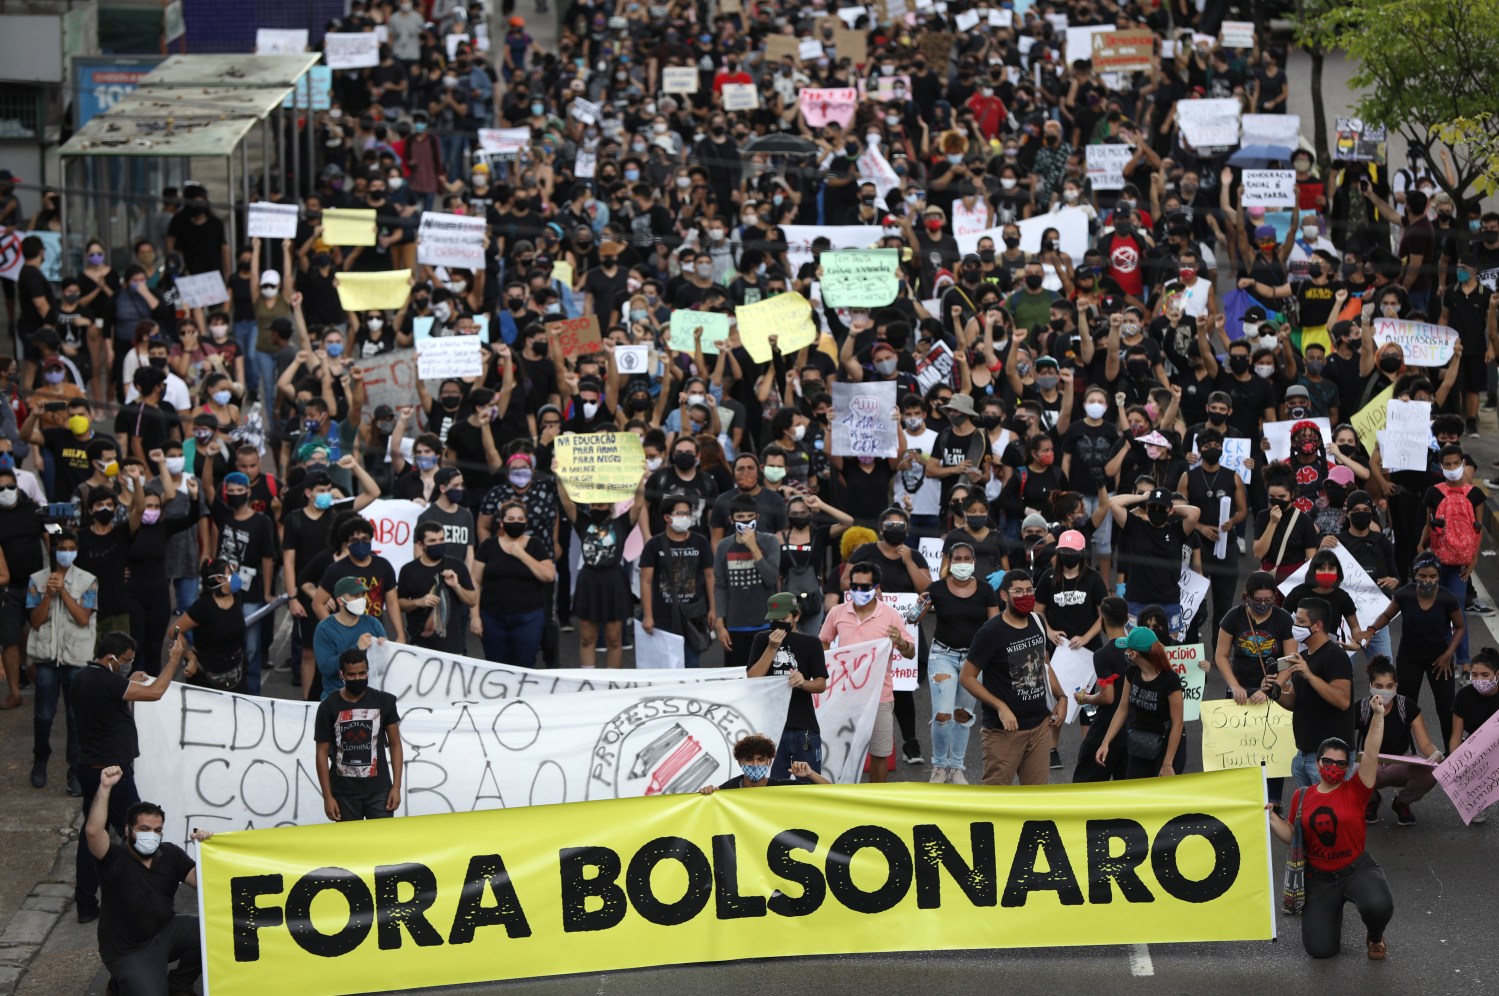 Anti-government demonstrators hold a banner that reads "Out Bolsonaro," in reference to Brazilian President Jair Bolsonaro, during a protest named "Amazonas for Democracy" in Manaus, Brazil, June 2, 2020. REUTERS/Bruno Kelly